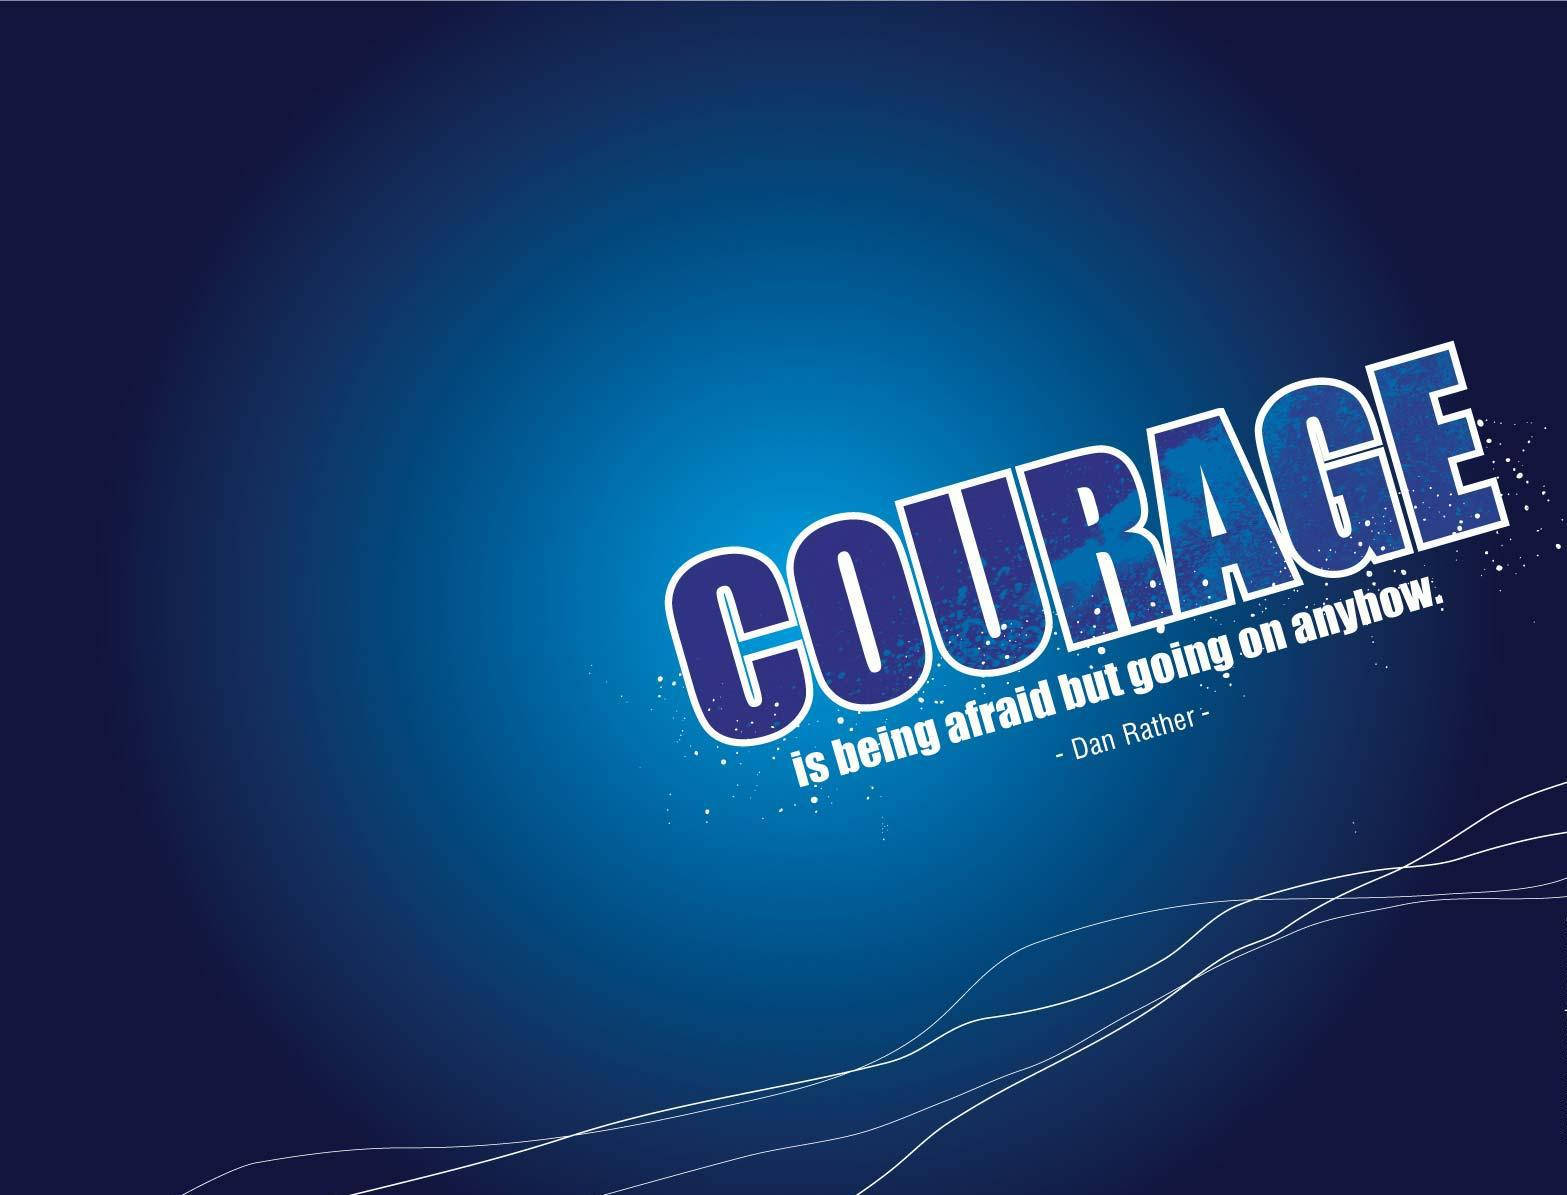 Courage Famous Quotes Wallpaper